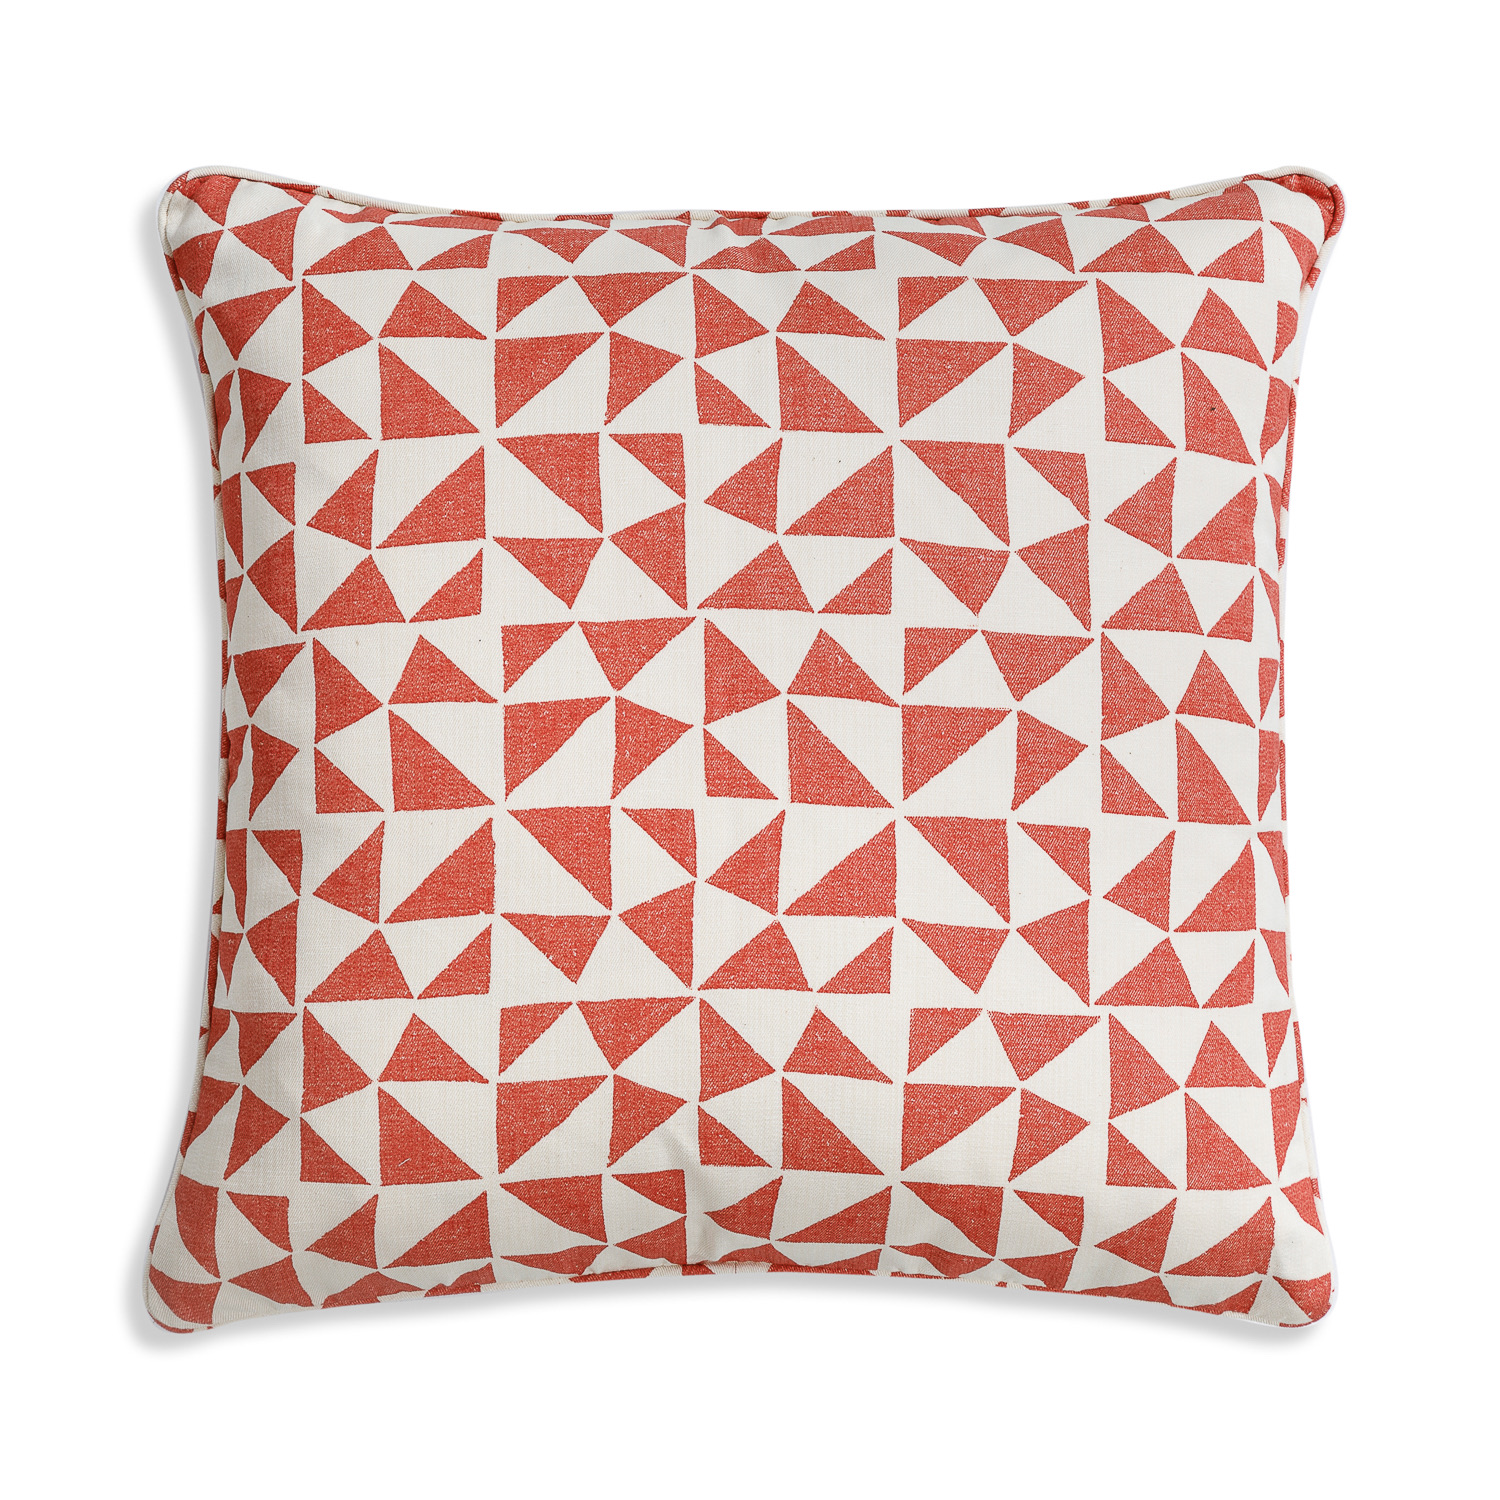 Cushion in Bright Red Circus